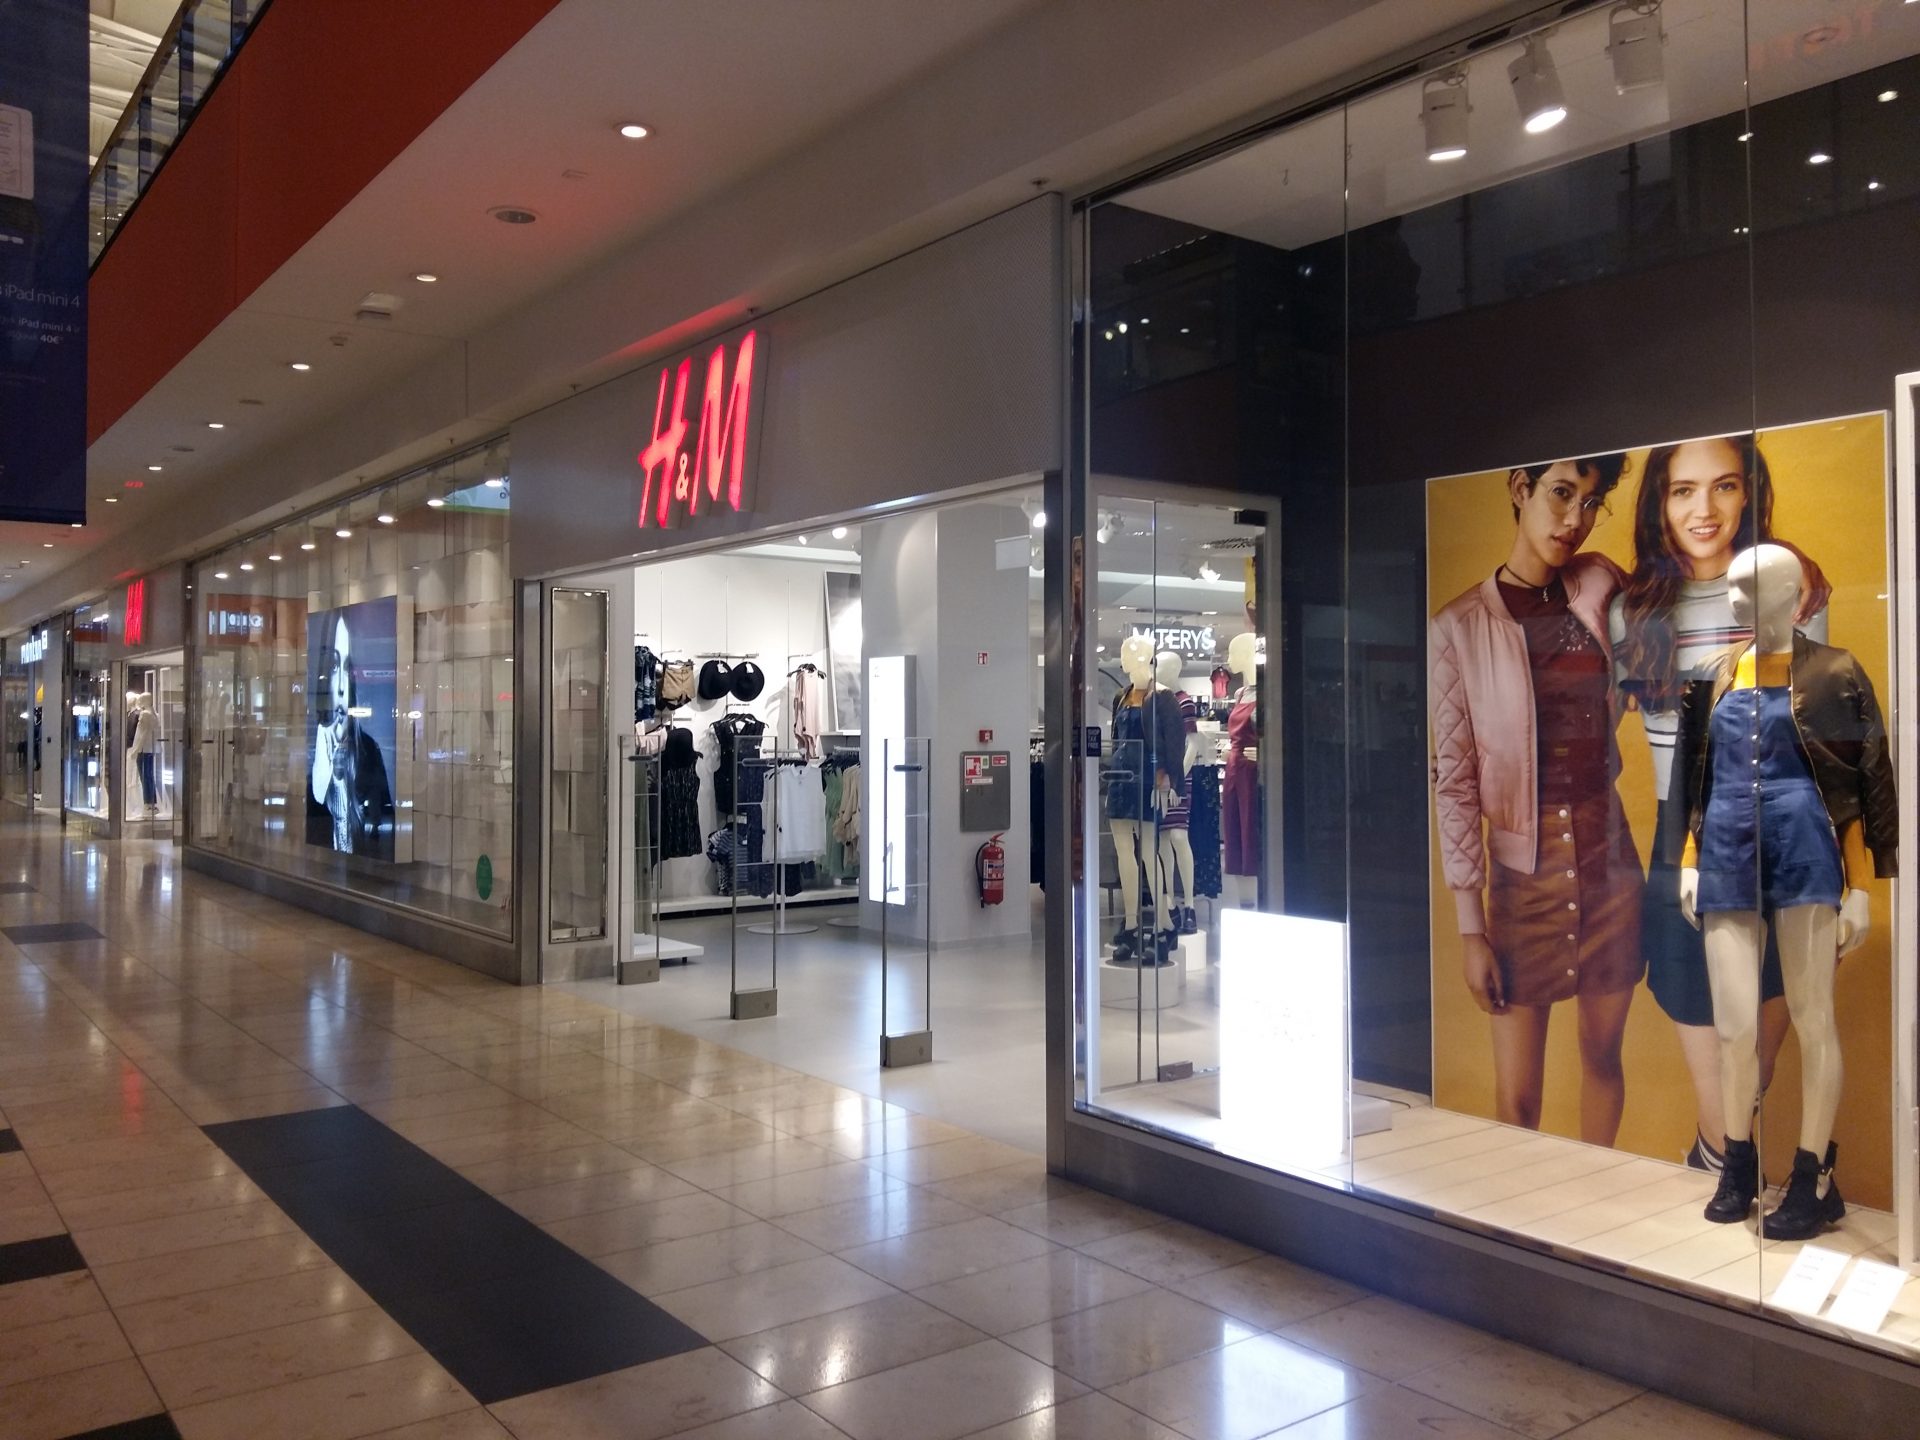 Installation works of “H & M“ store premises in Shopping and Entertainment Centre „Ozas“